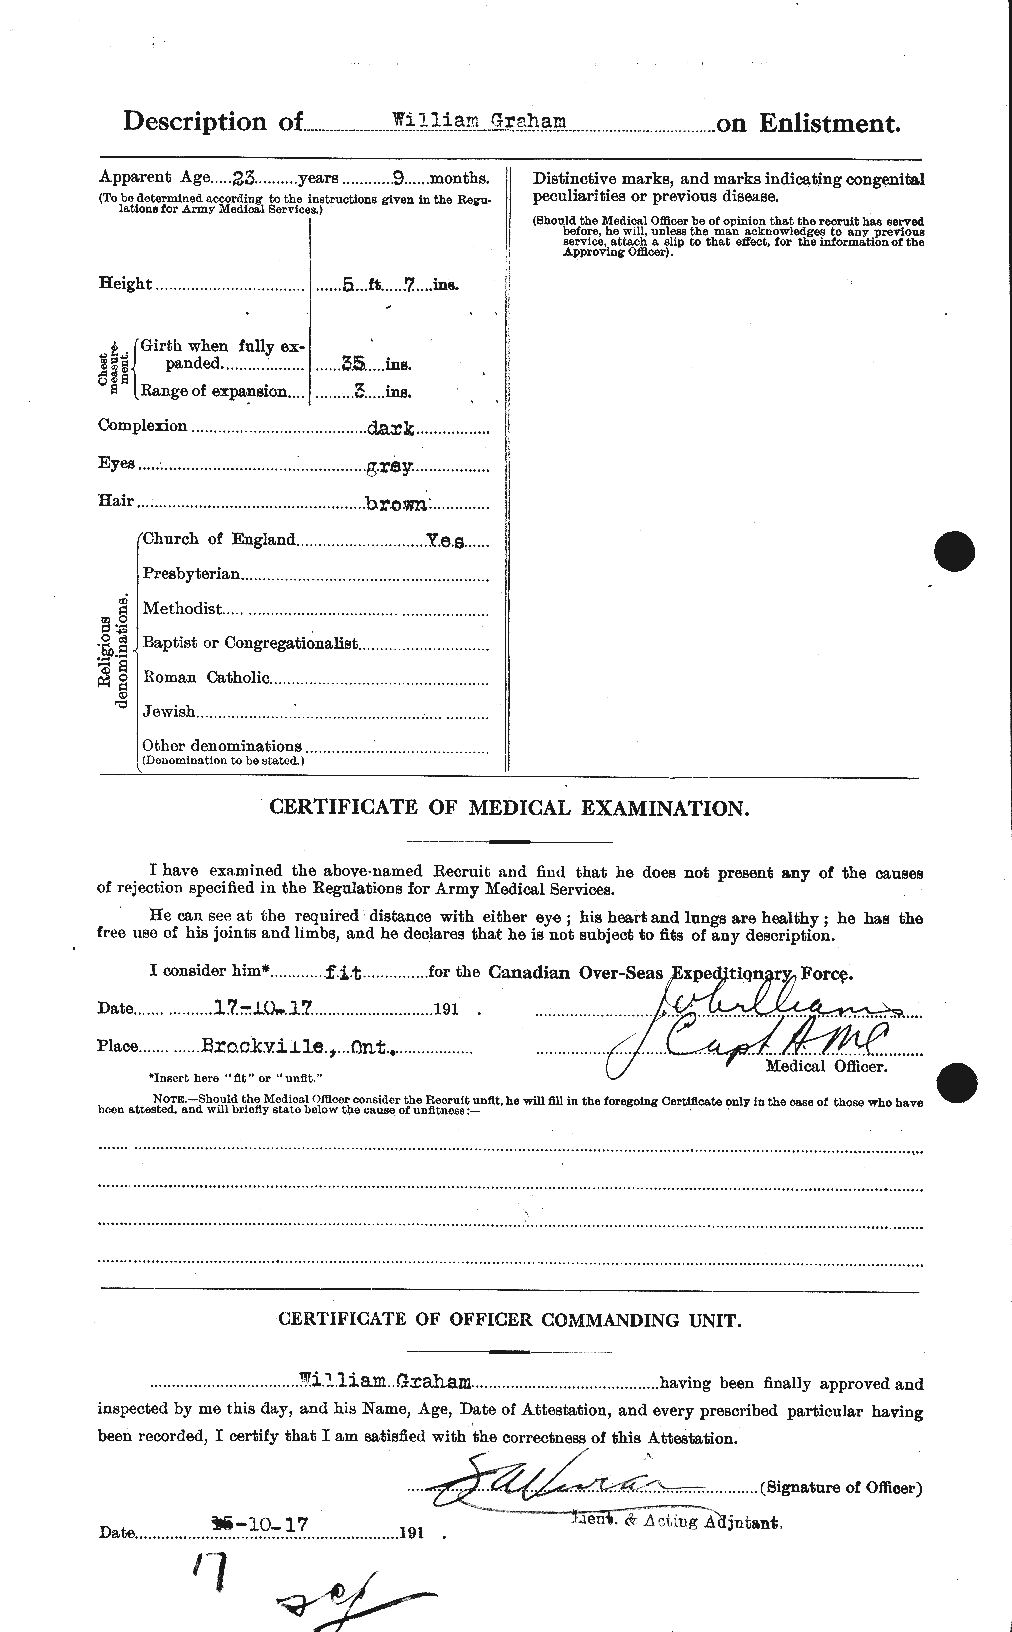 Personnel Records of the First World War - CEF 362709b